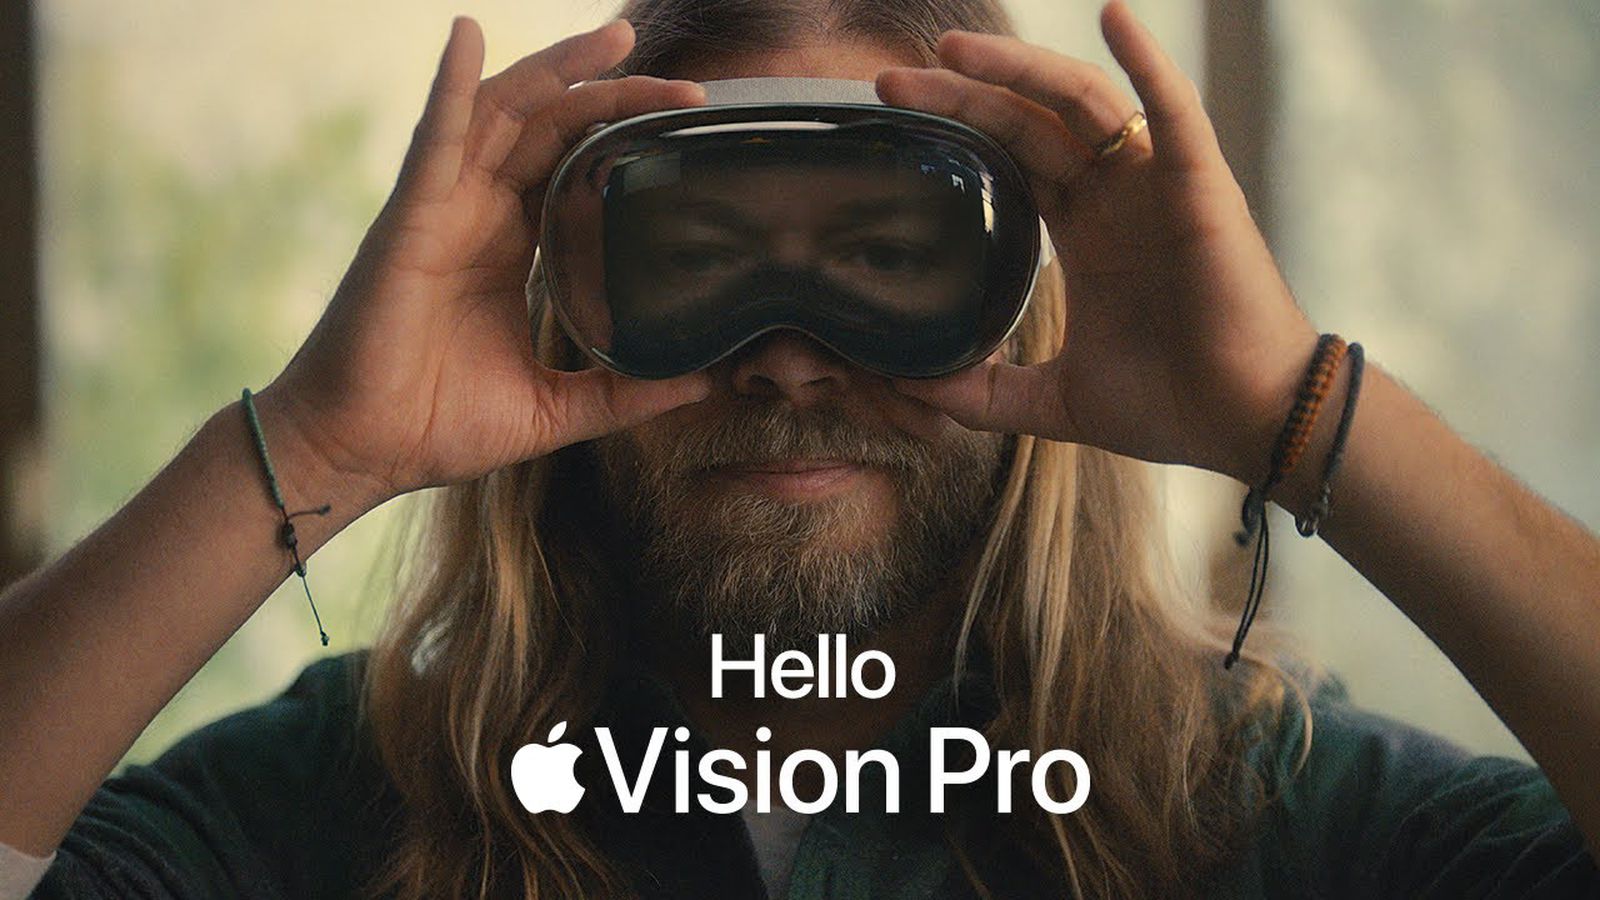 Apple Says 'Hello' to Vision Pro in New Ad as Headset Nears Launch - macrumors.com